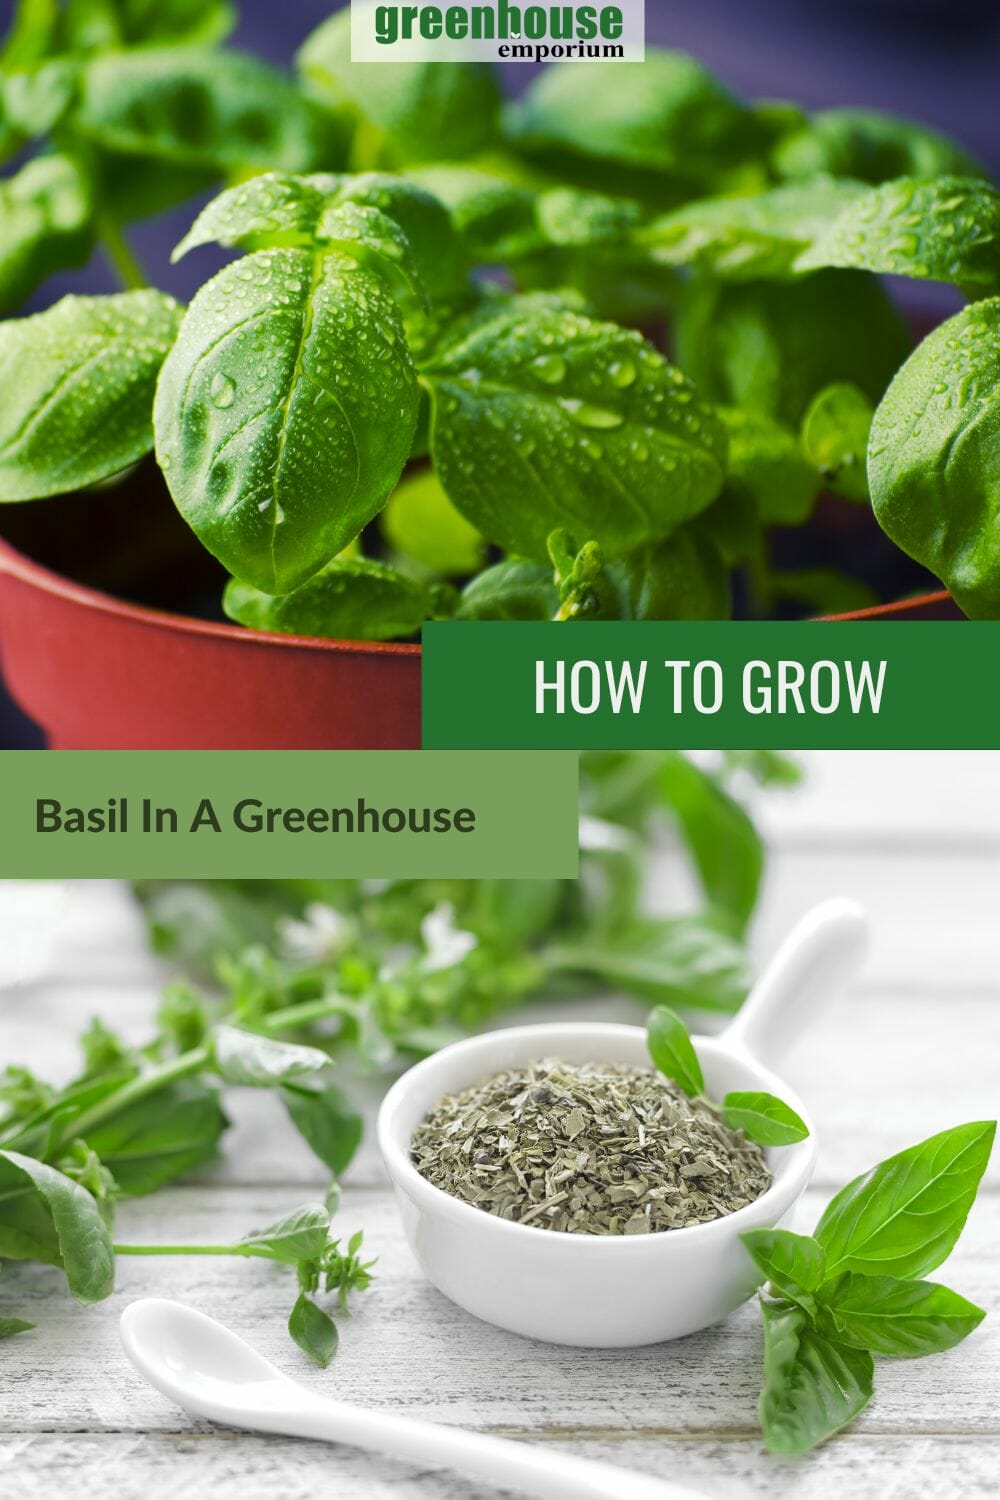 Basil plant and dried basil with the text: How to Grow Basil In A Greenhouse